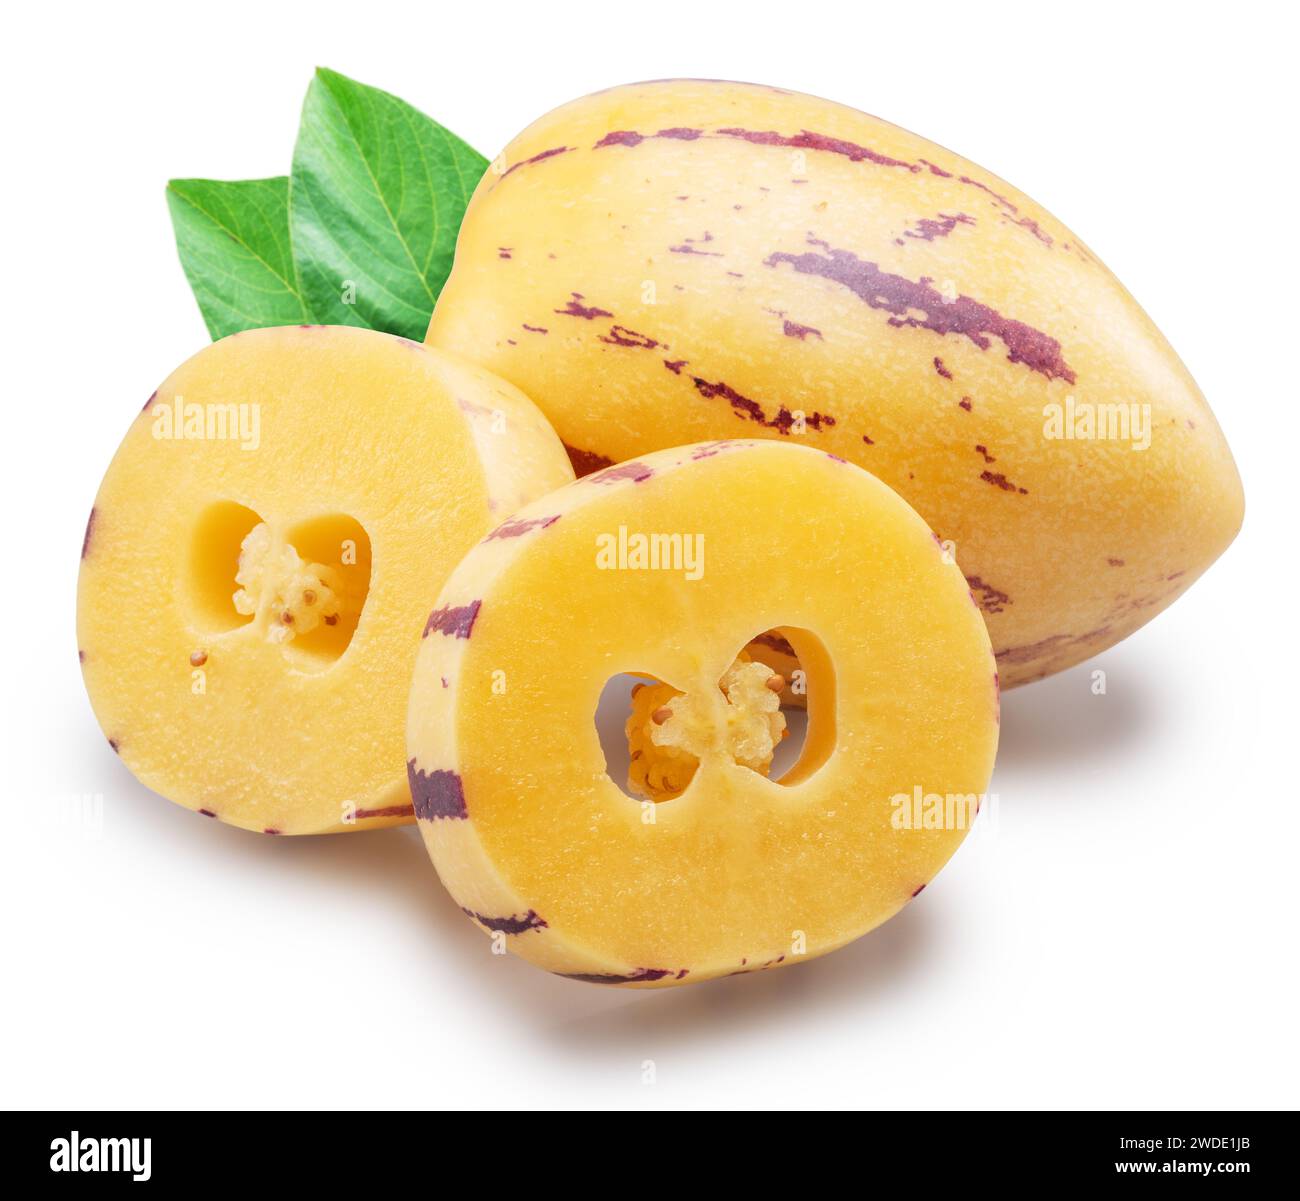 Pepino melon or pepino dulce and sliced fruit isolated on white background. File contains clipping paths. Stock Photo